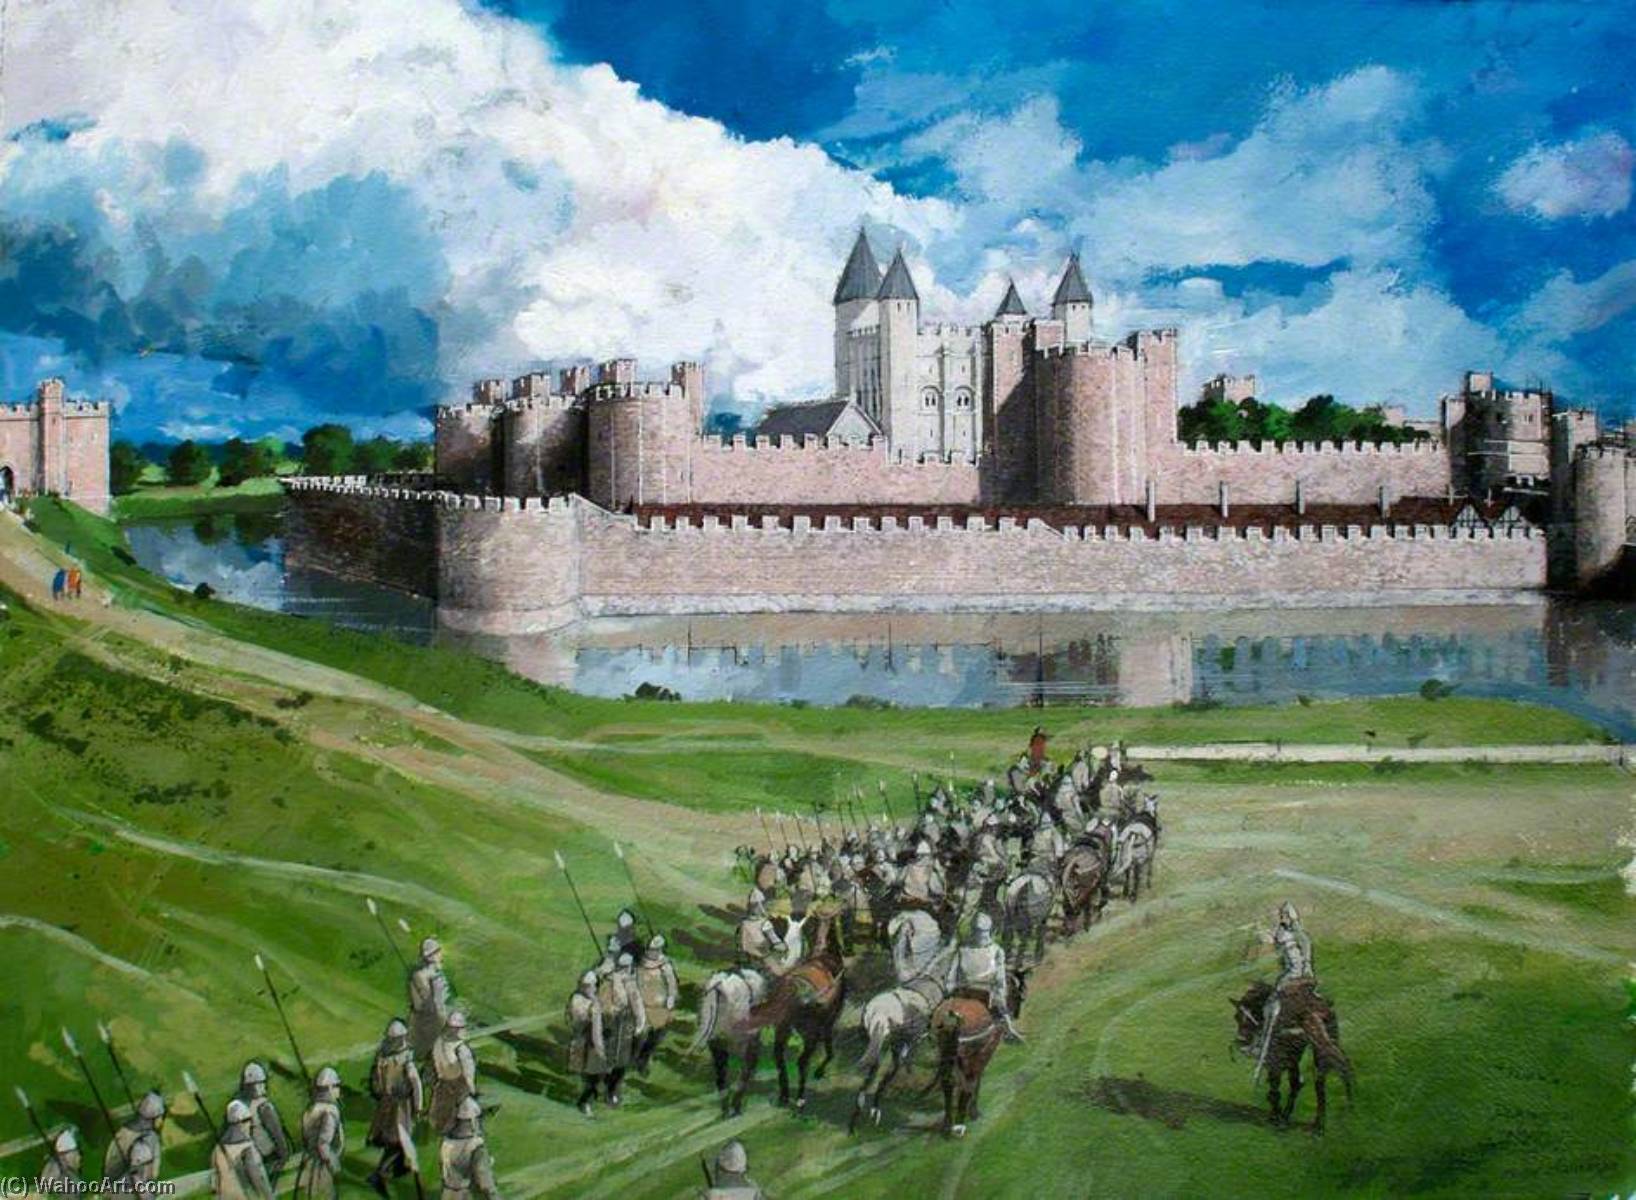 WikiOO.org - Encyclopedia of Fine Arts - Festés, Grafika Ivan Lapper - Reconstructed View of the Tower of London, Edward I's Completed Outer Wall, 1300